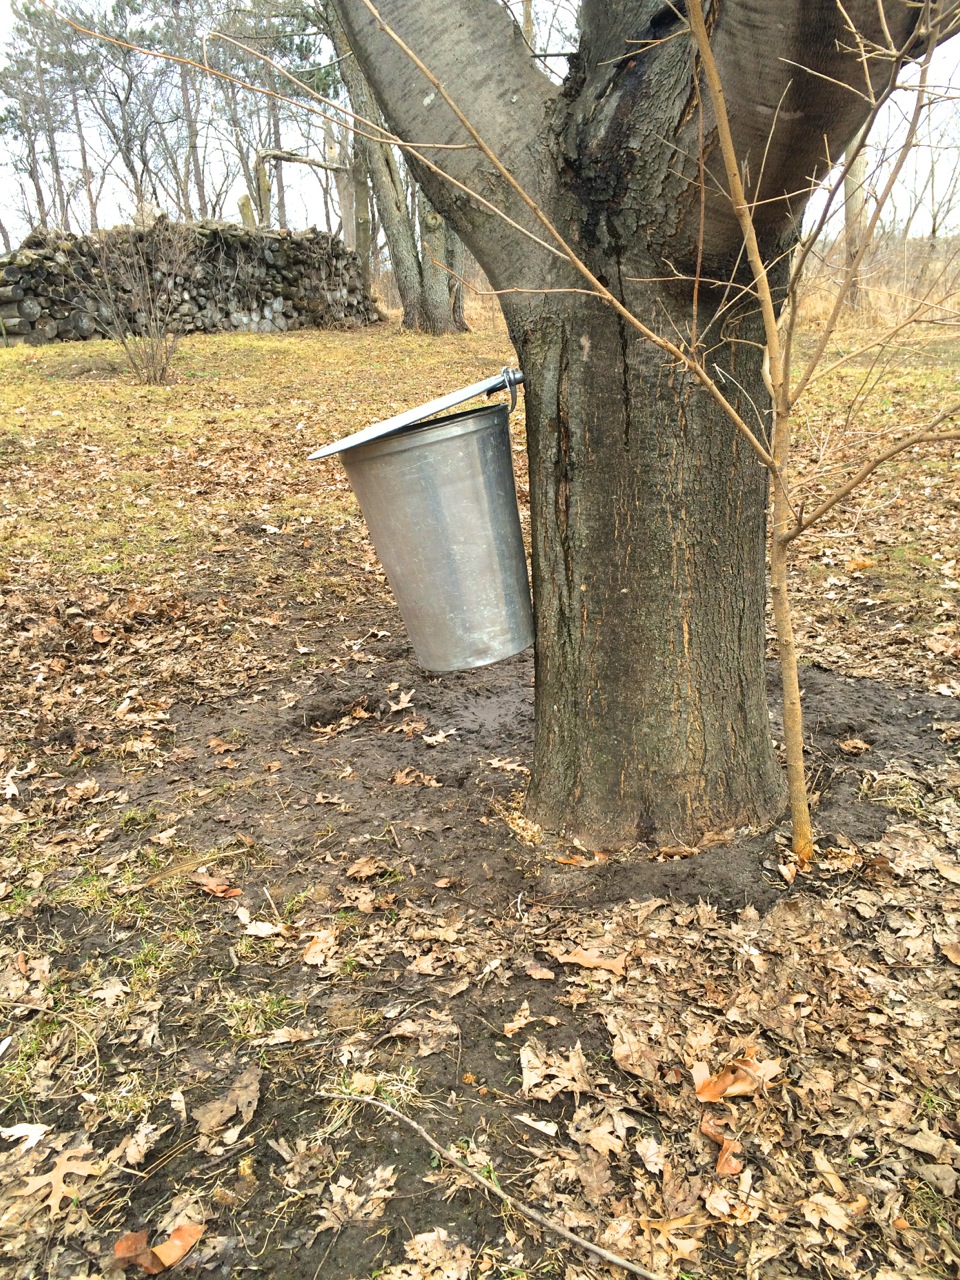 Maple sap syrup collection kit